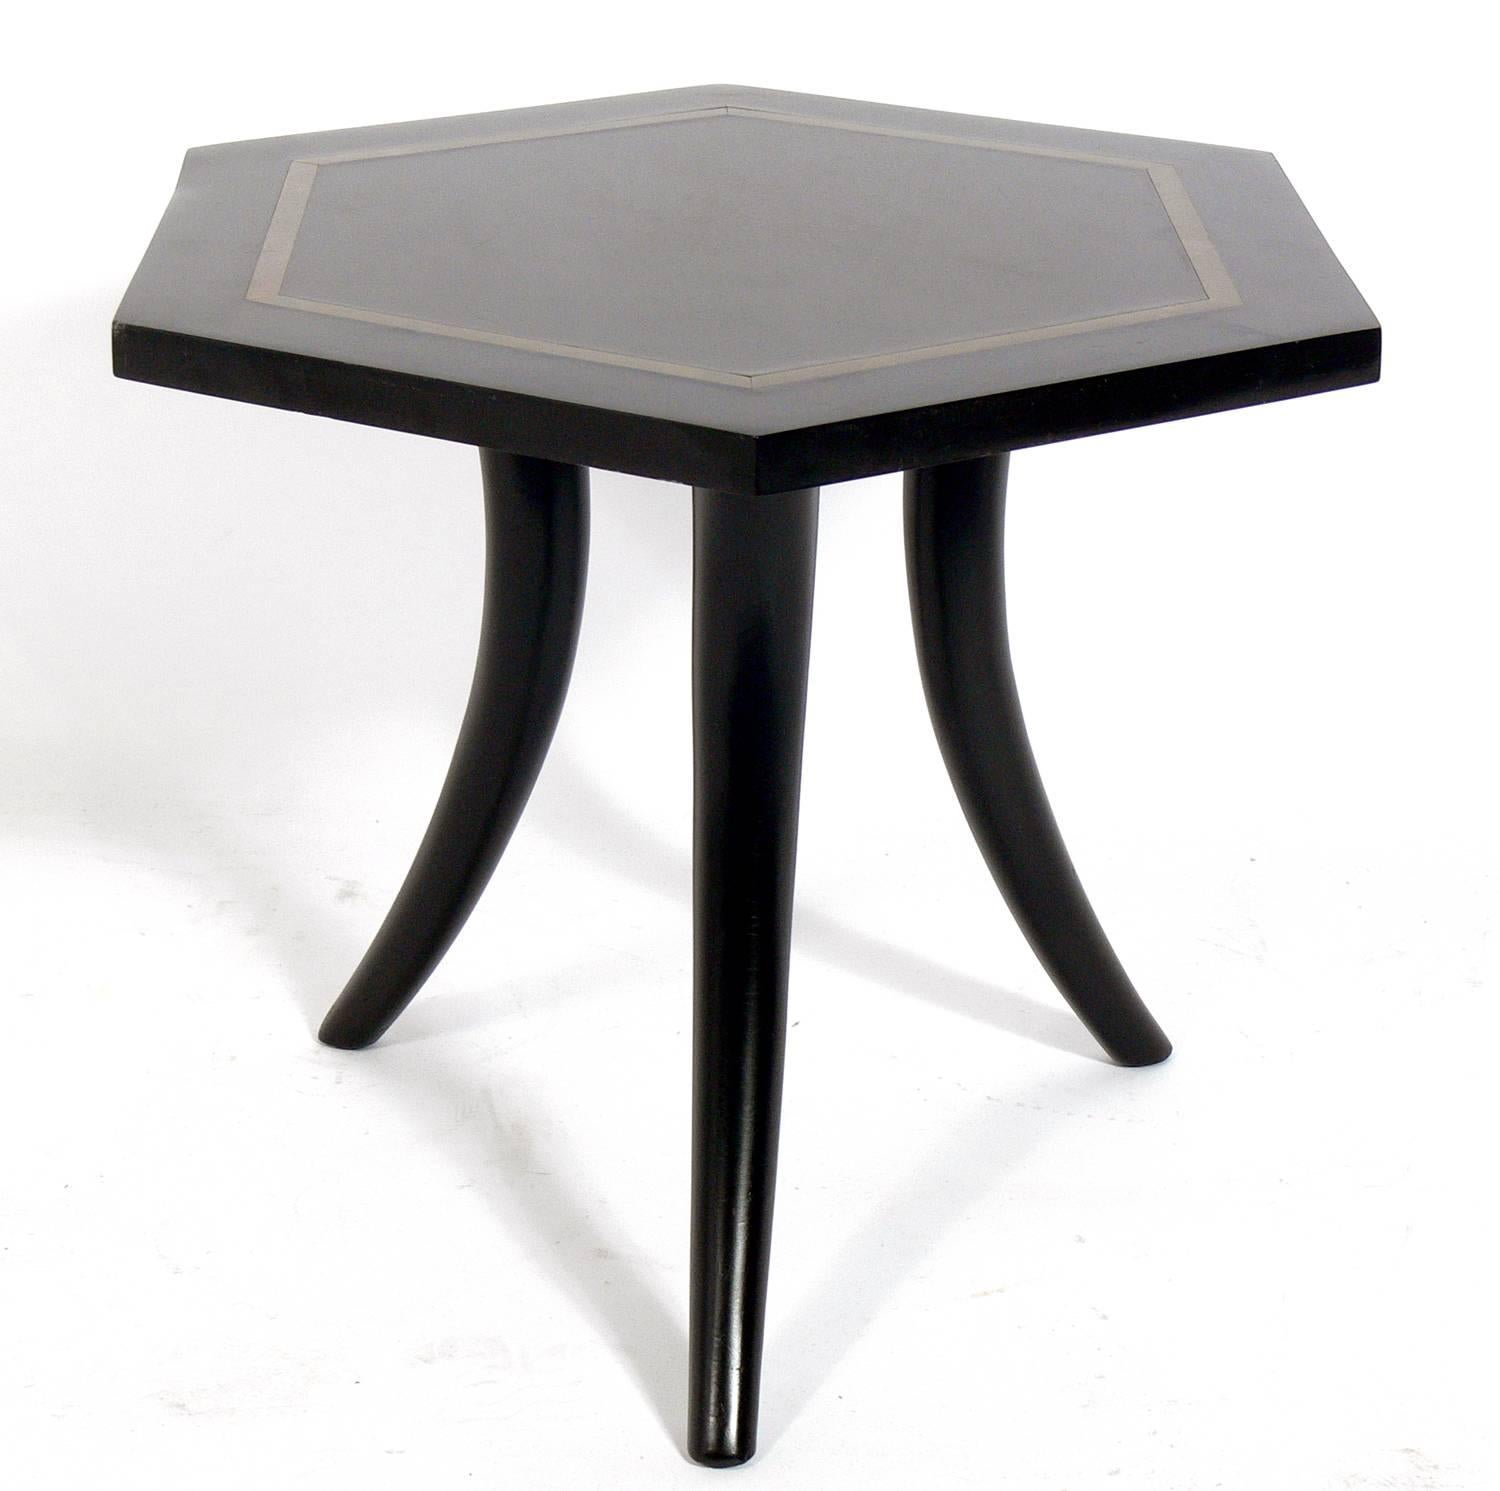 Brass Inlaid Tripod Table, American, circa 1950s. Very similar to designs by Harvey Probber or T.H. Robsjohn Gibbings. Curvaceous tusk legs have been refinished in black lacquer. The inlaid brass laminate top is low maintenance and perfect for a